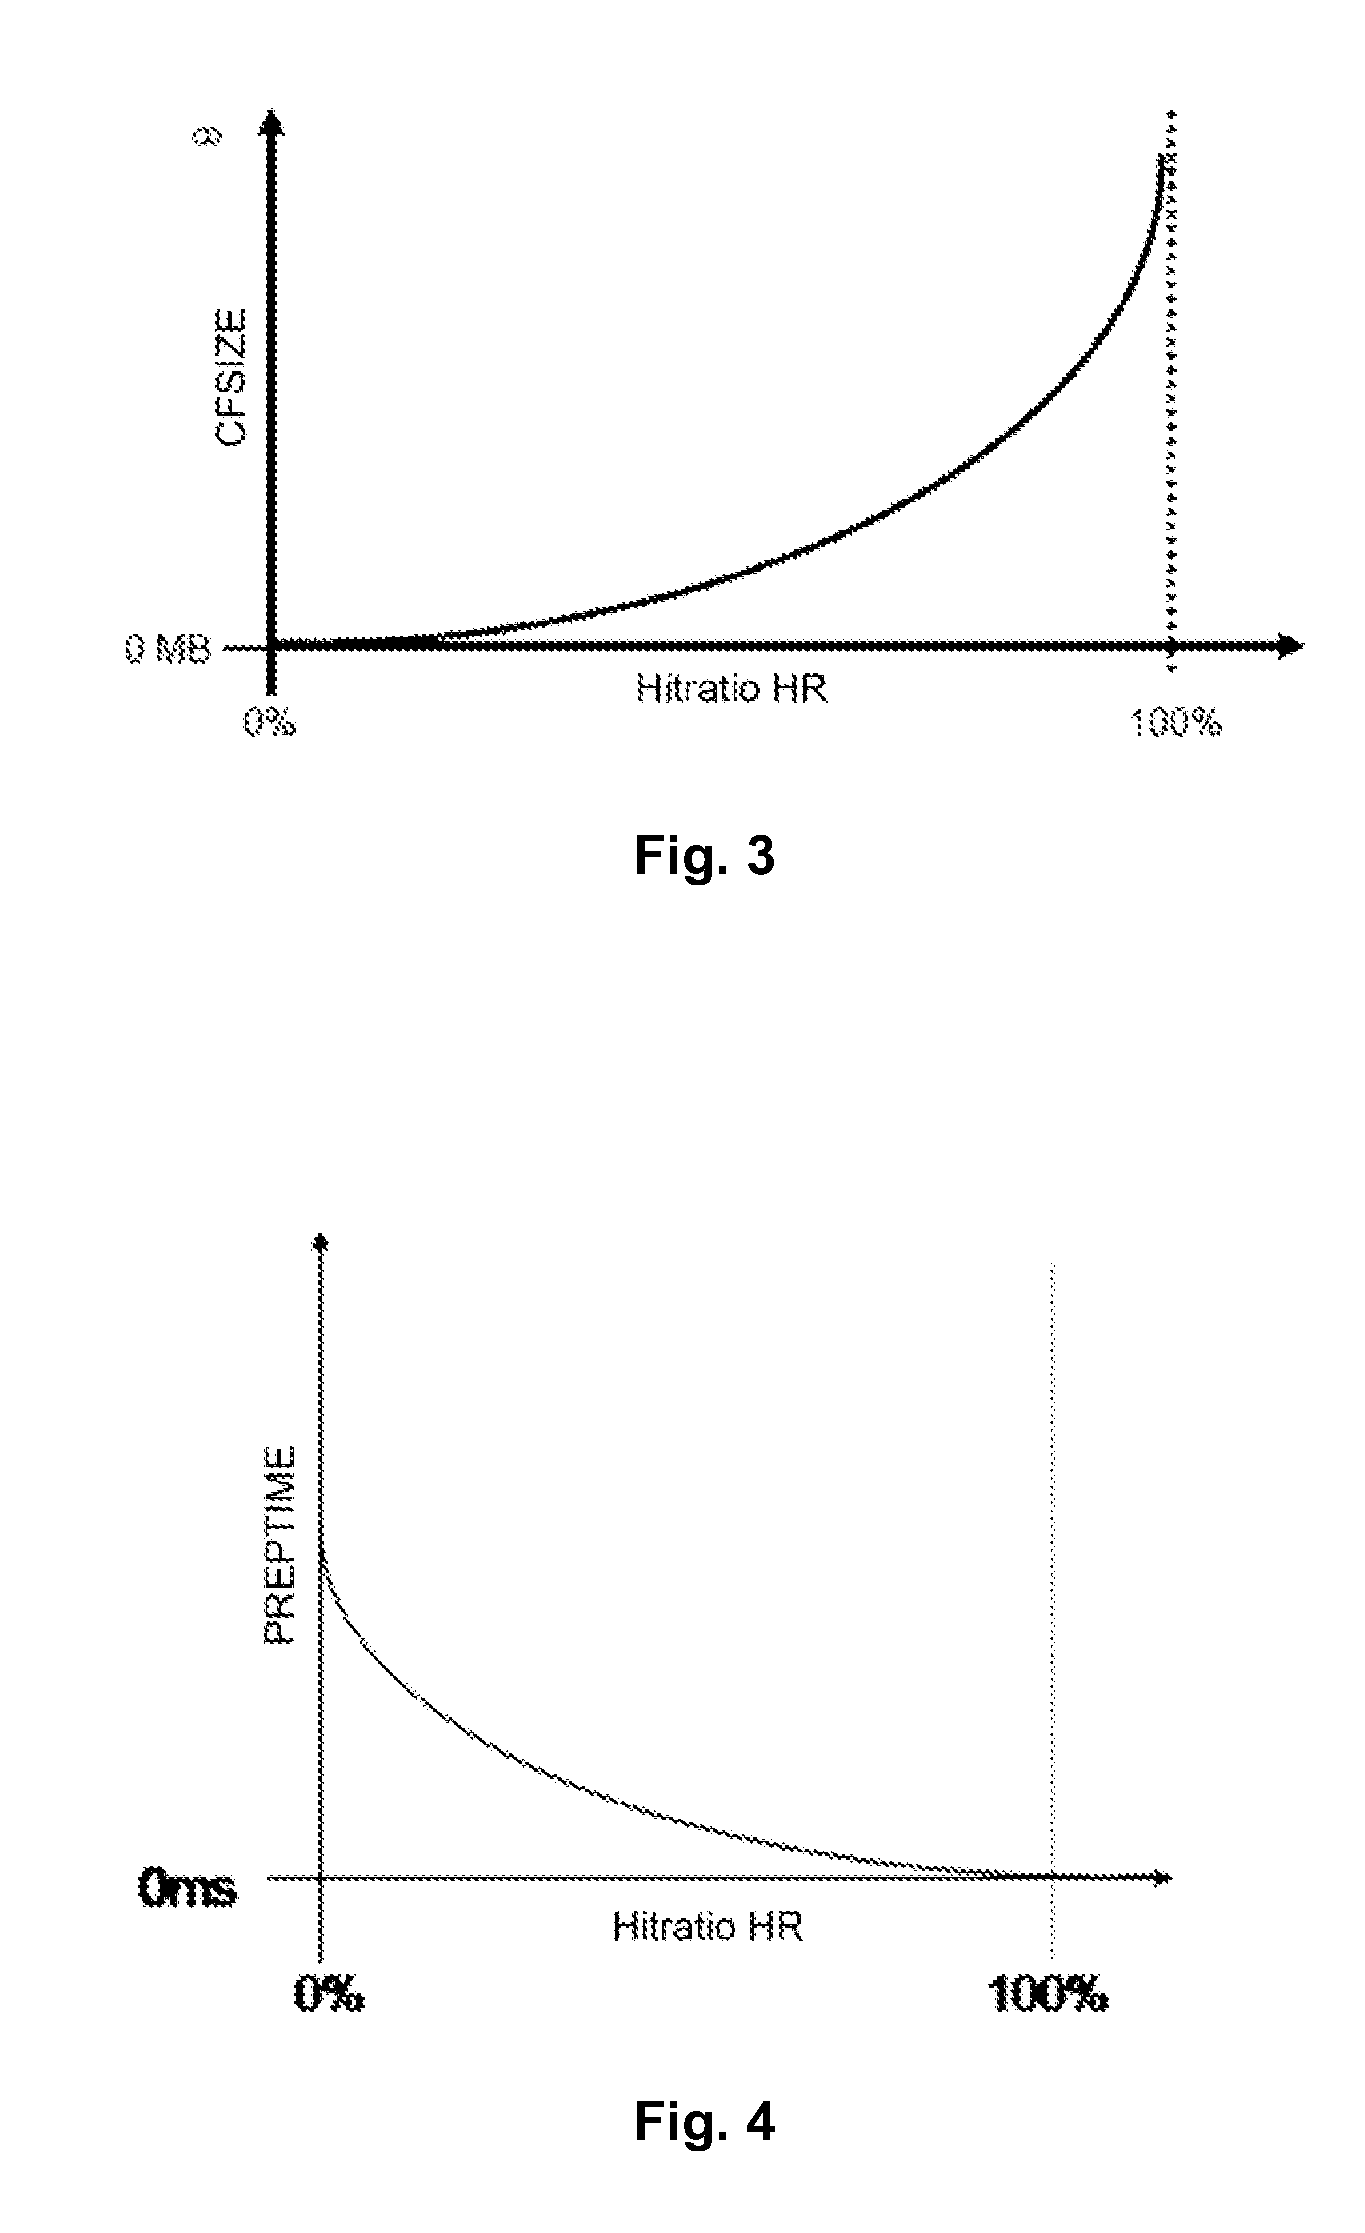 System and method to improve processing time of databases by cache optimization